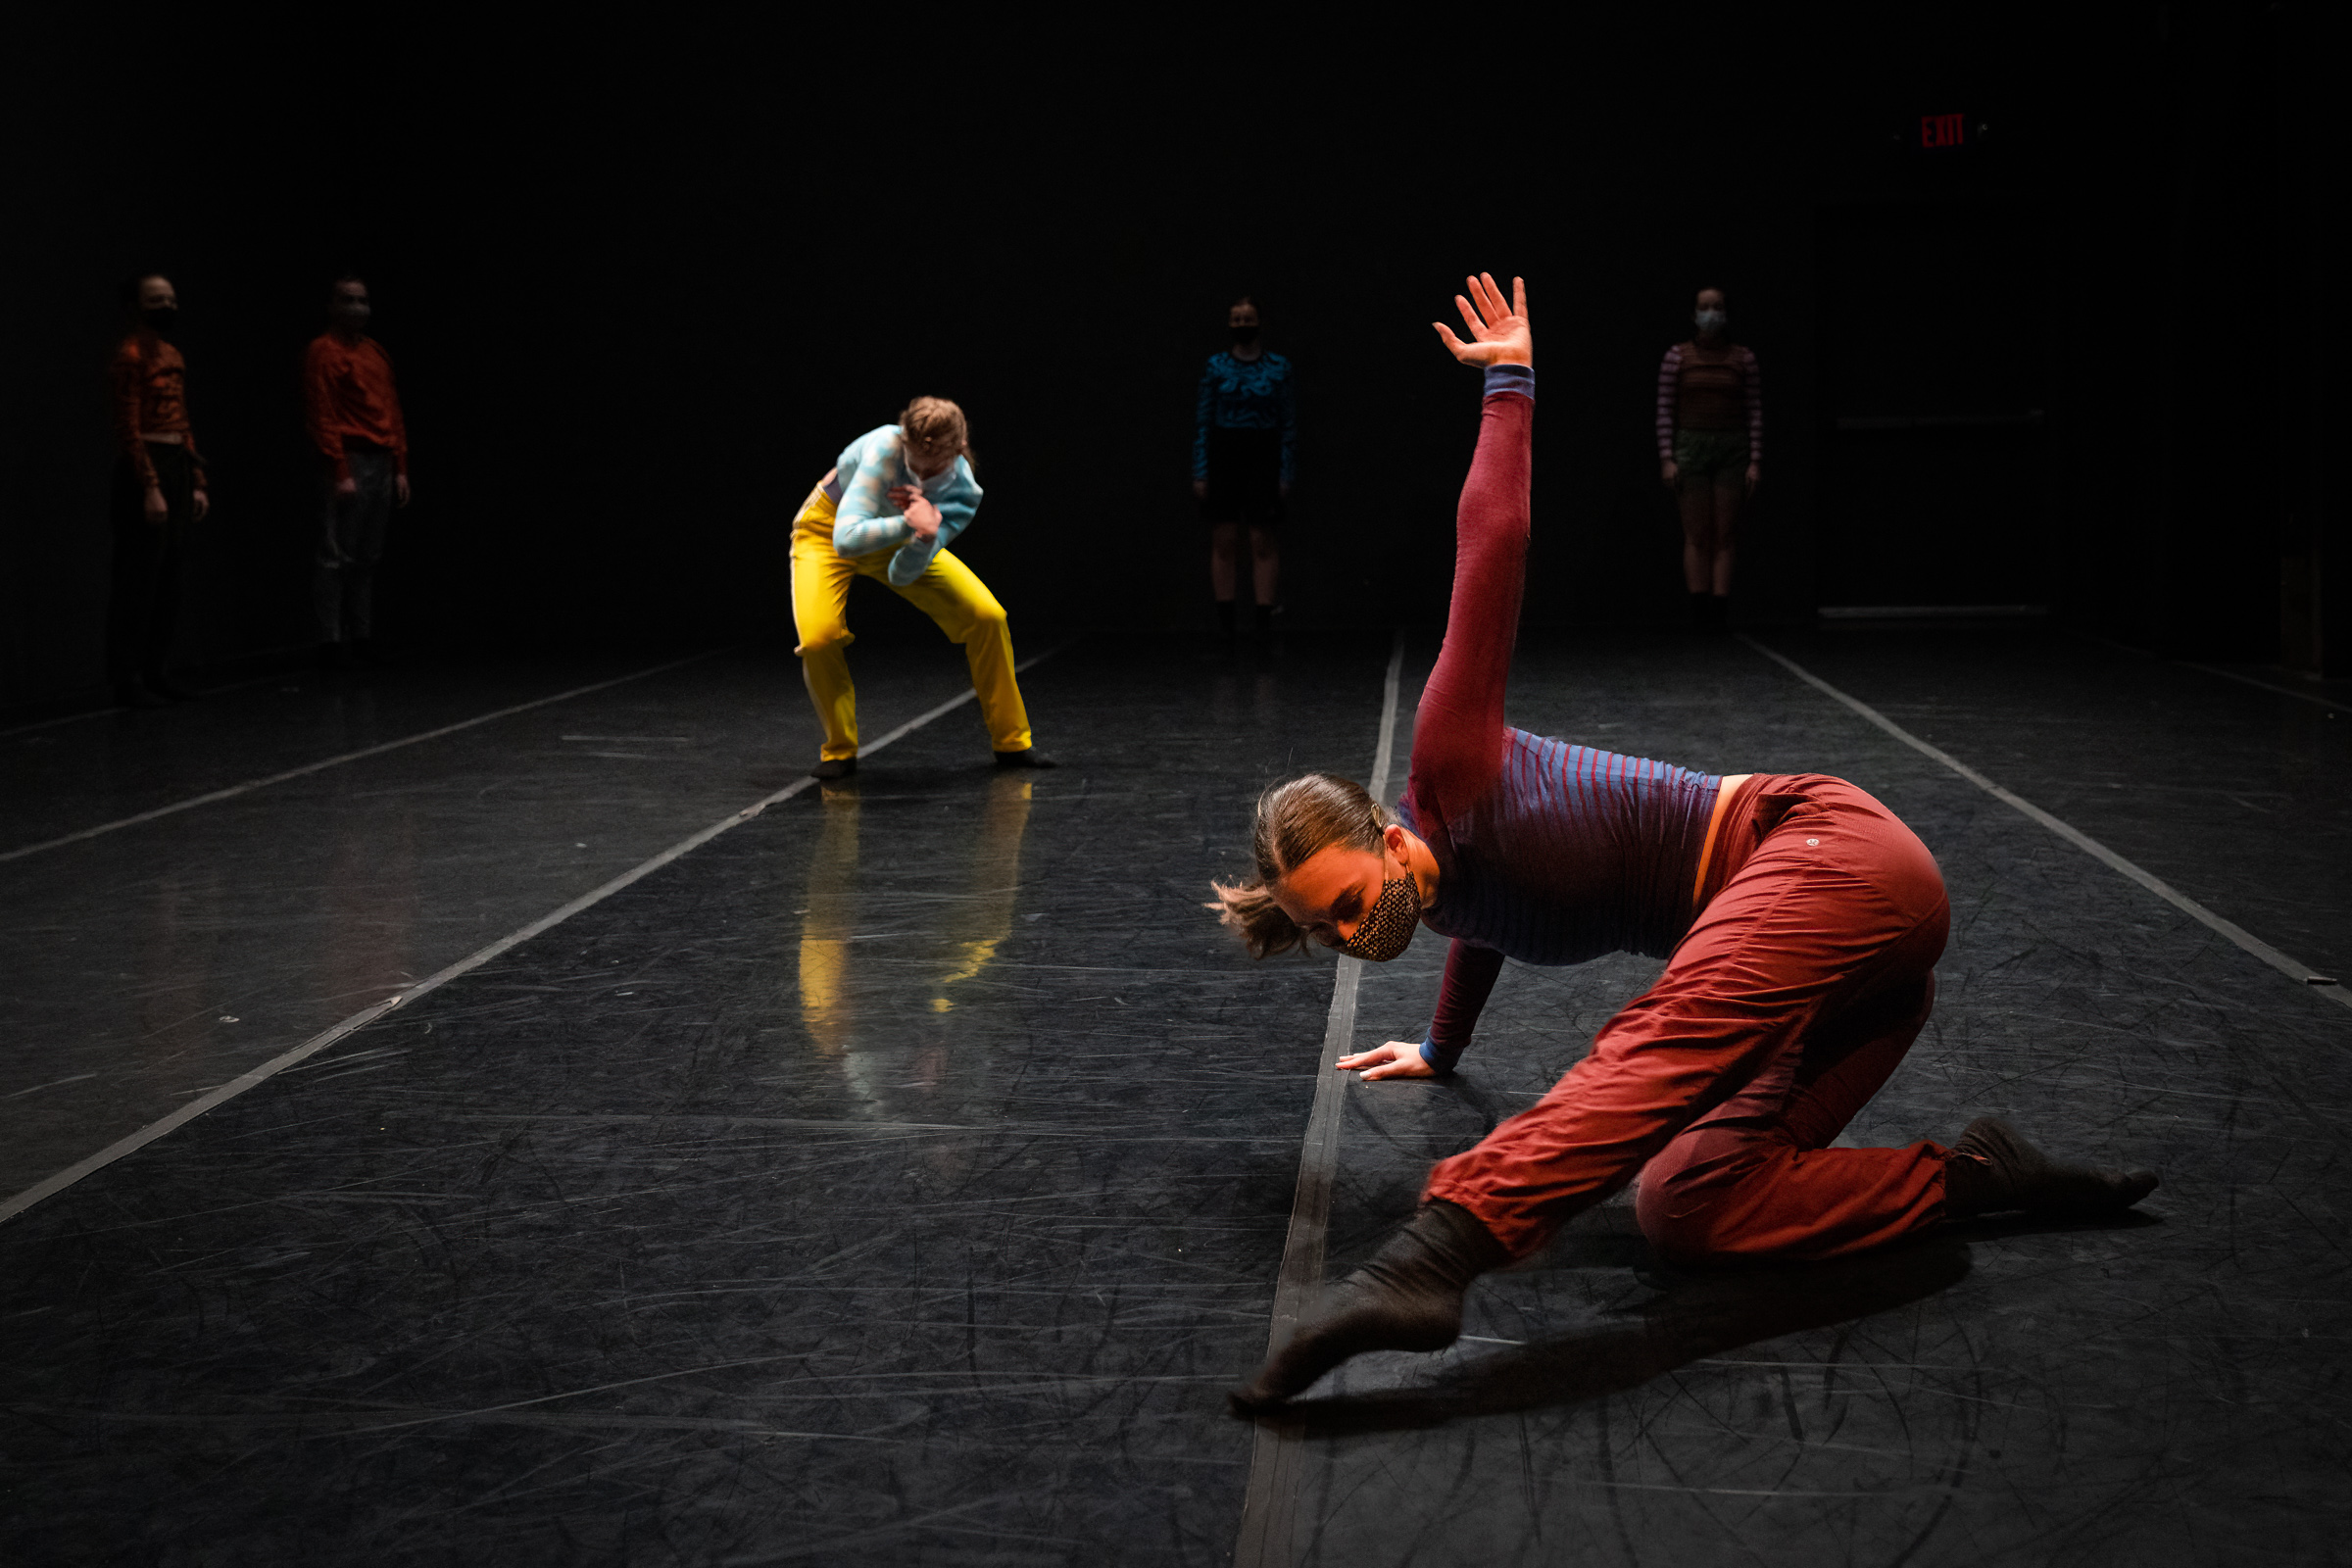 LINES Ballet | Training Program artists performing a work by Brett Conway on stage, one student is doing work in red pants and blue top with red sleeves while the other stands with spine curled, arms in, and legs bent while wearing yellow pants and light blue shirt, other dancers can be seen further back standing on stage, all dancers are wearing masks